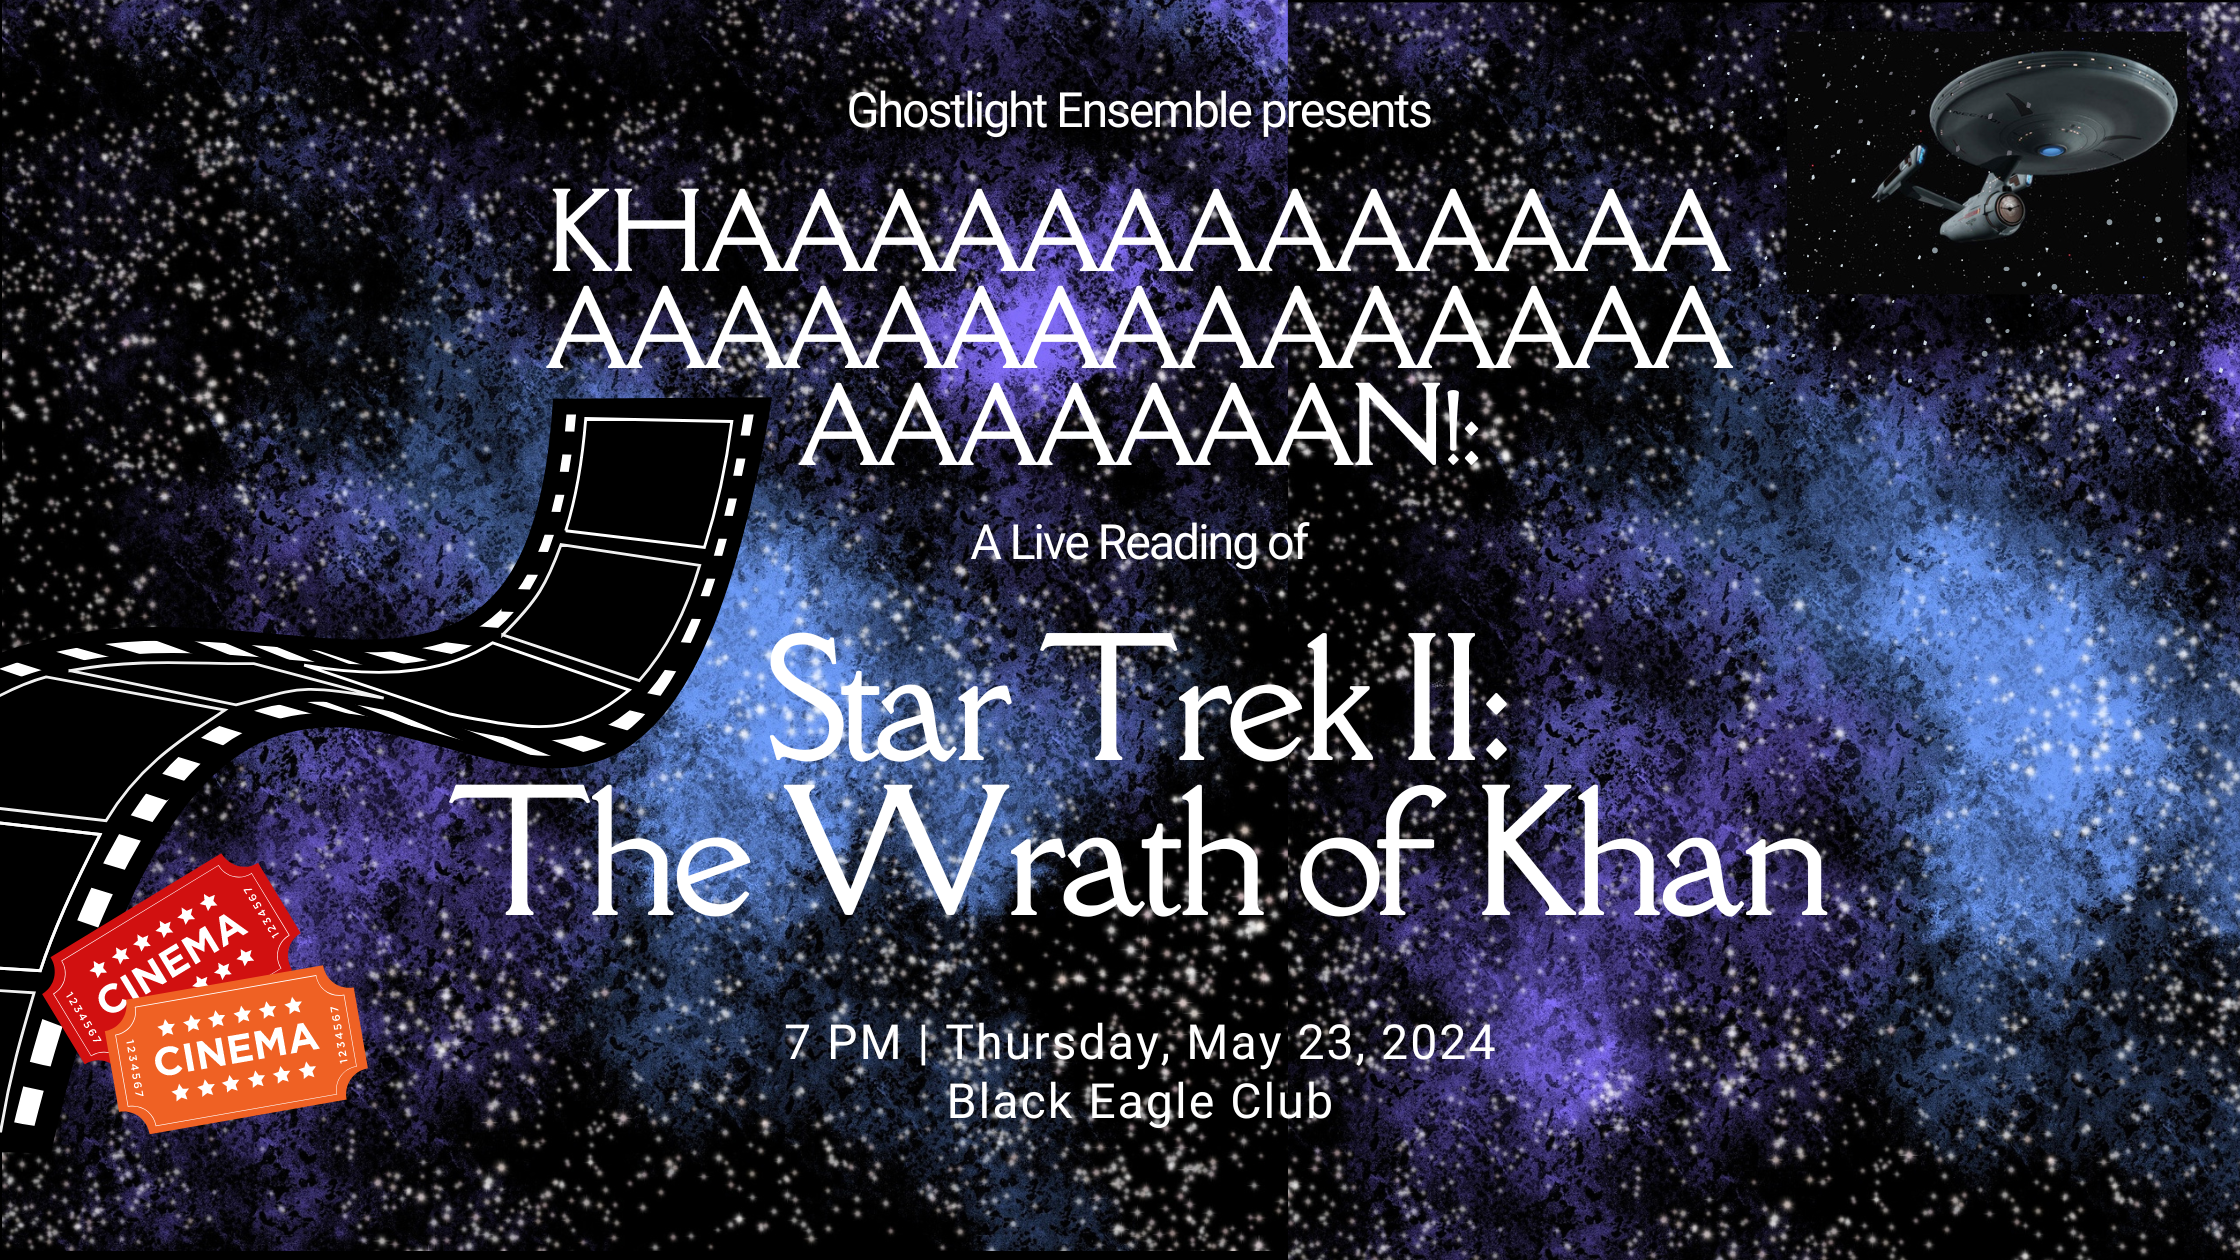   Coming later in May: A live reading of Star Trek II  